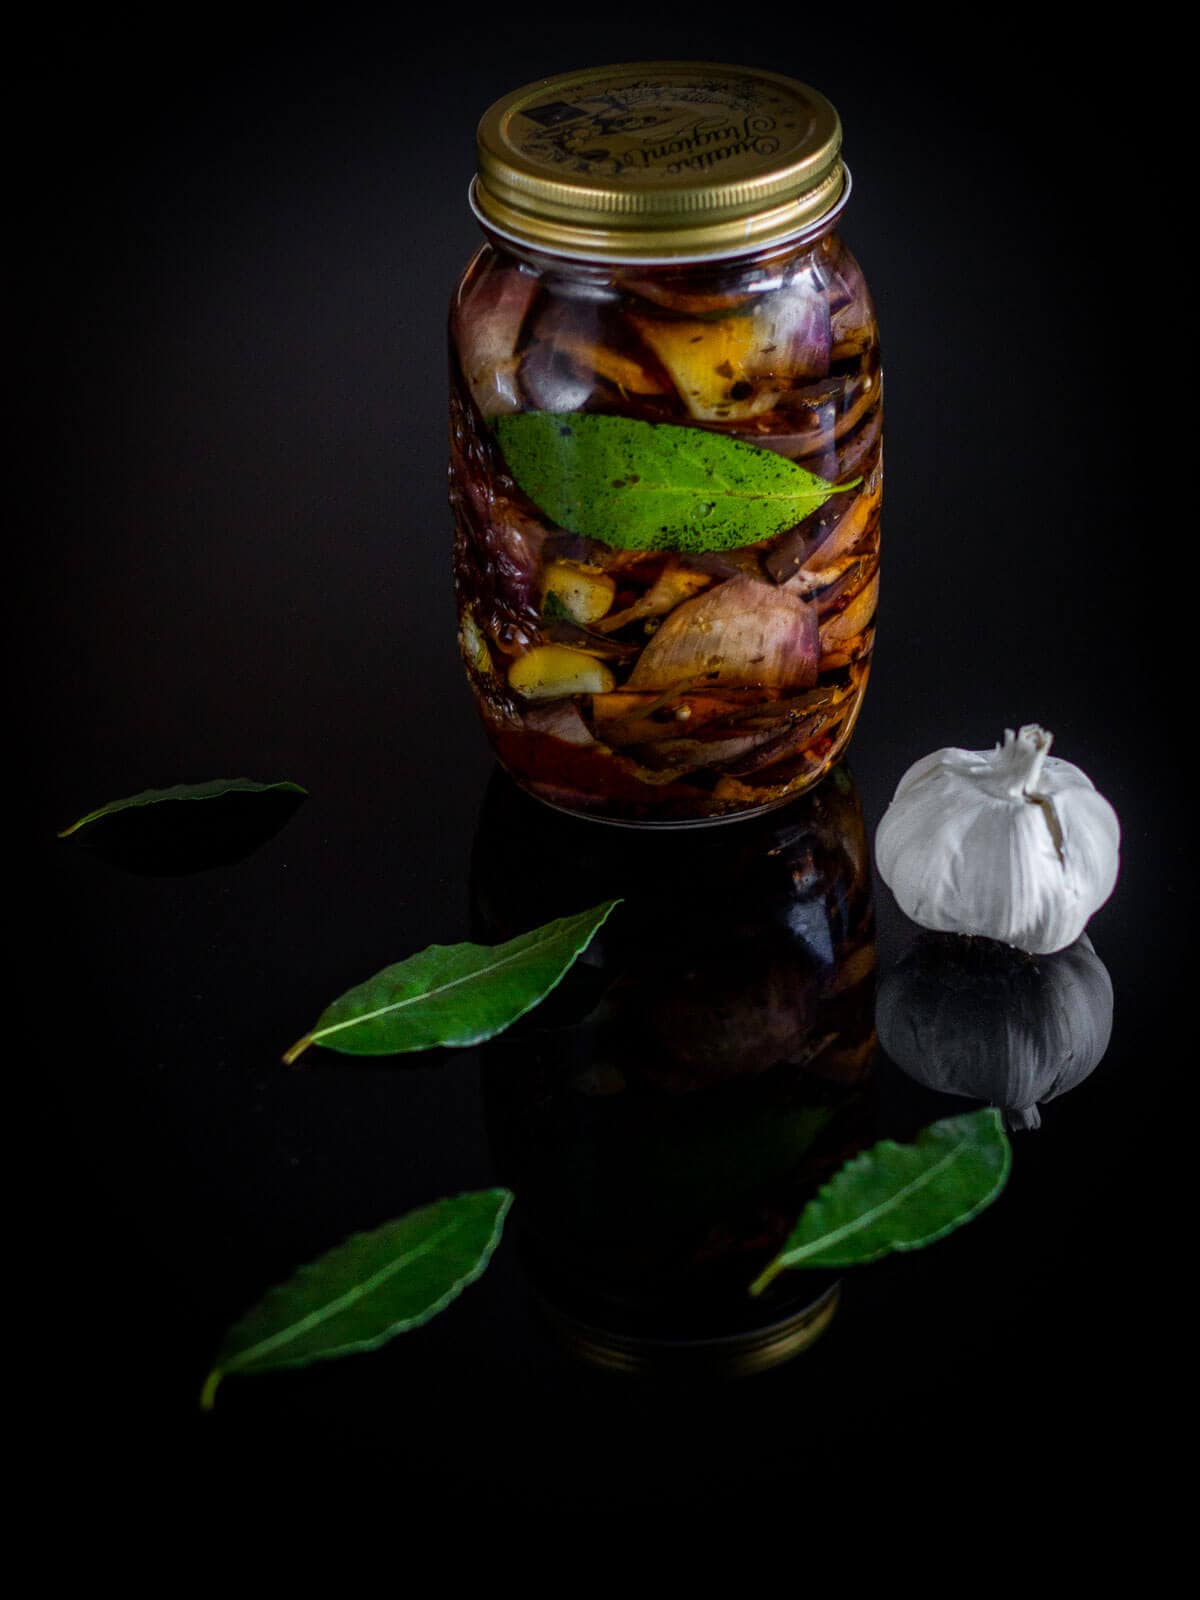 pickled eggplants in a canned jar.